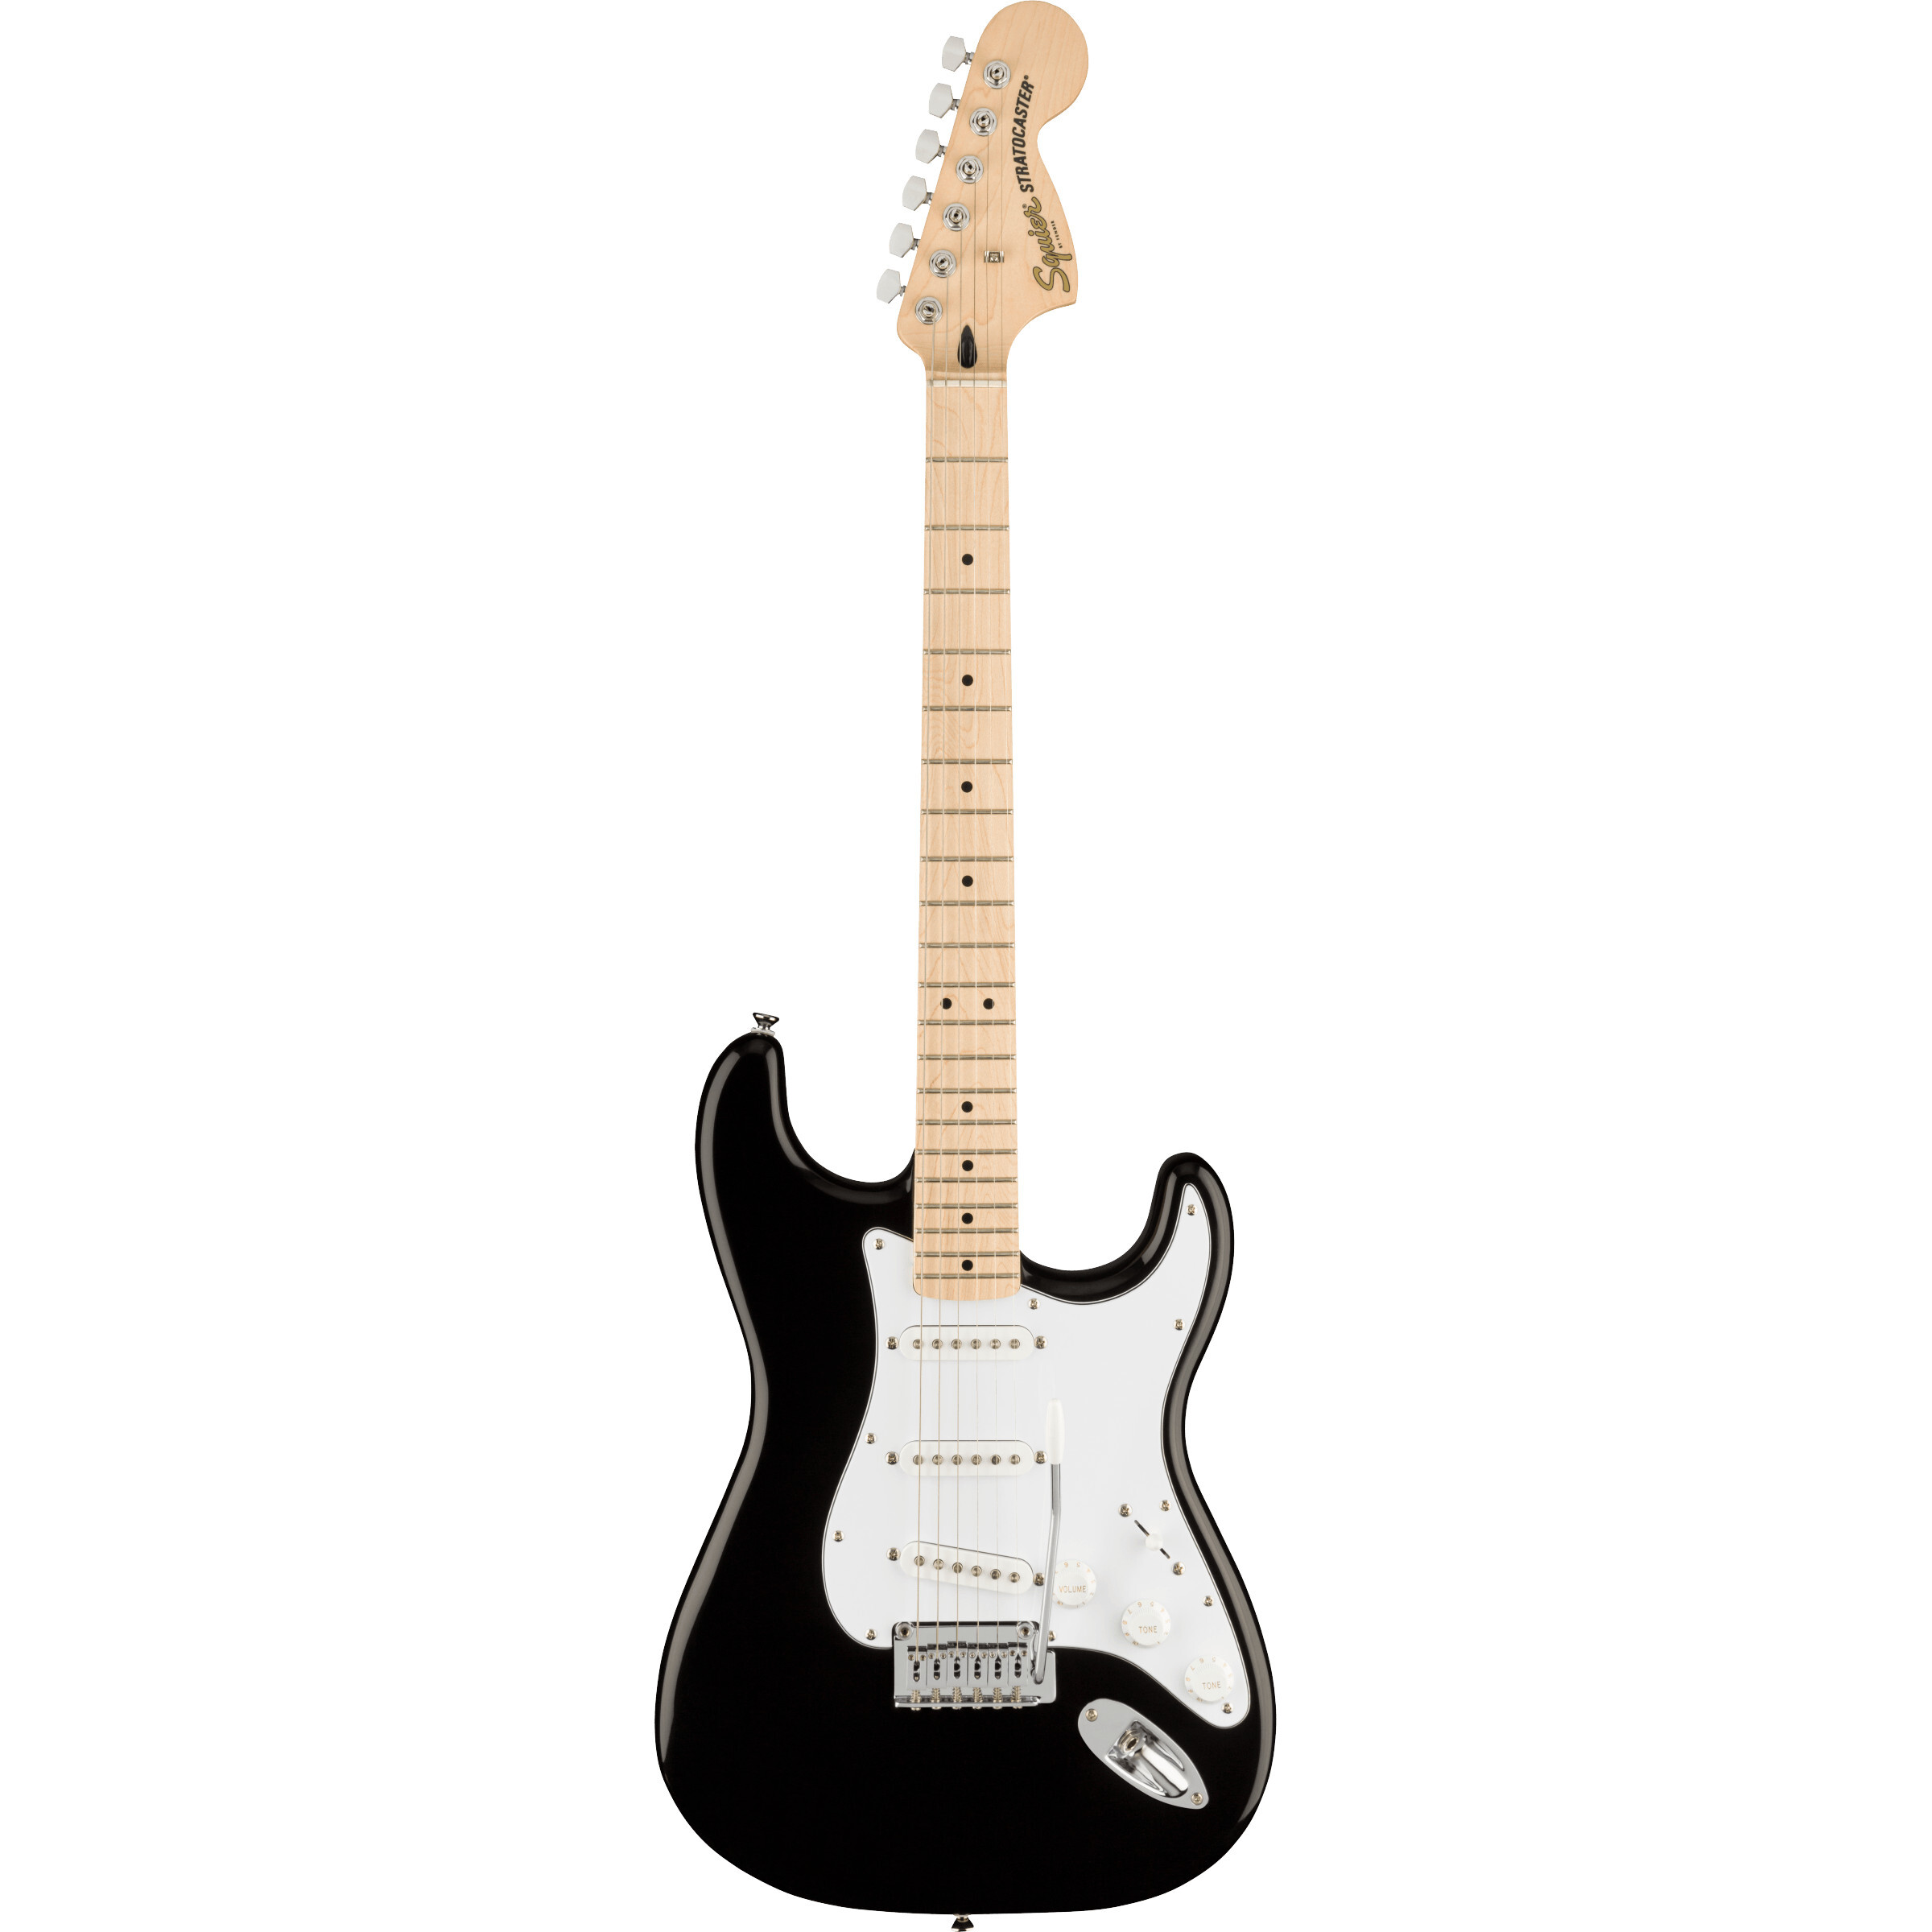 Squier Affinity Series Stratocaster MN Black